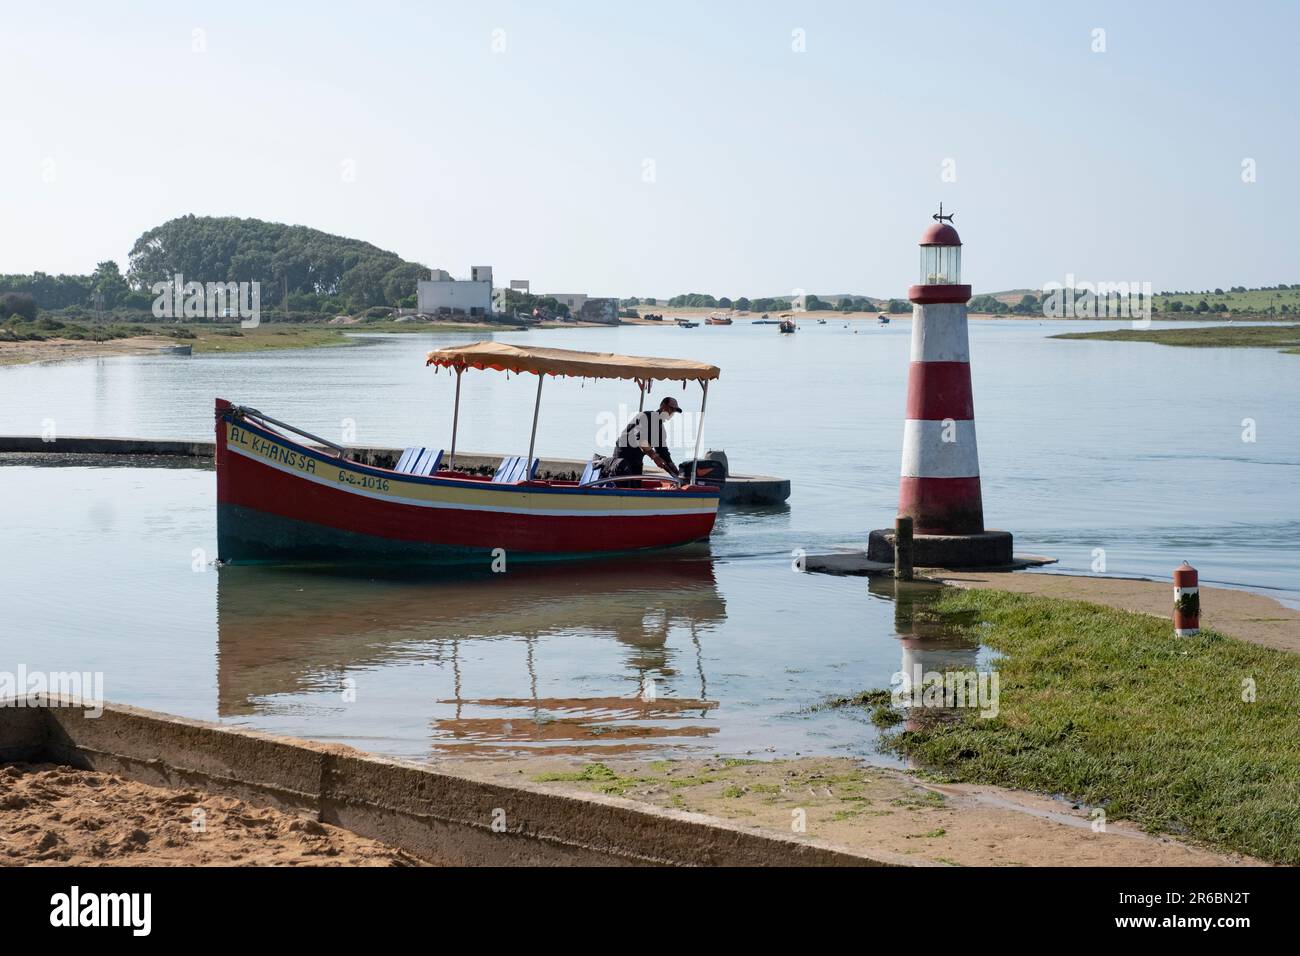 A man mooring his boat at the waterside entrance to Ostrea II oyster restaurant near Oualidia, Morocco Stock Photo